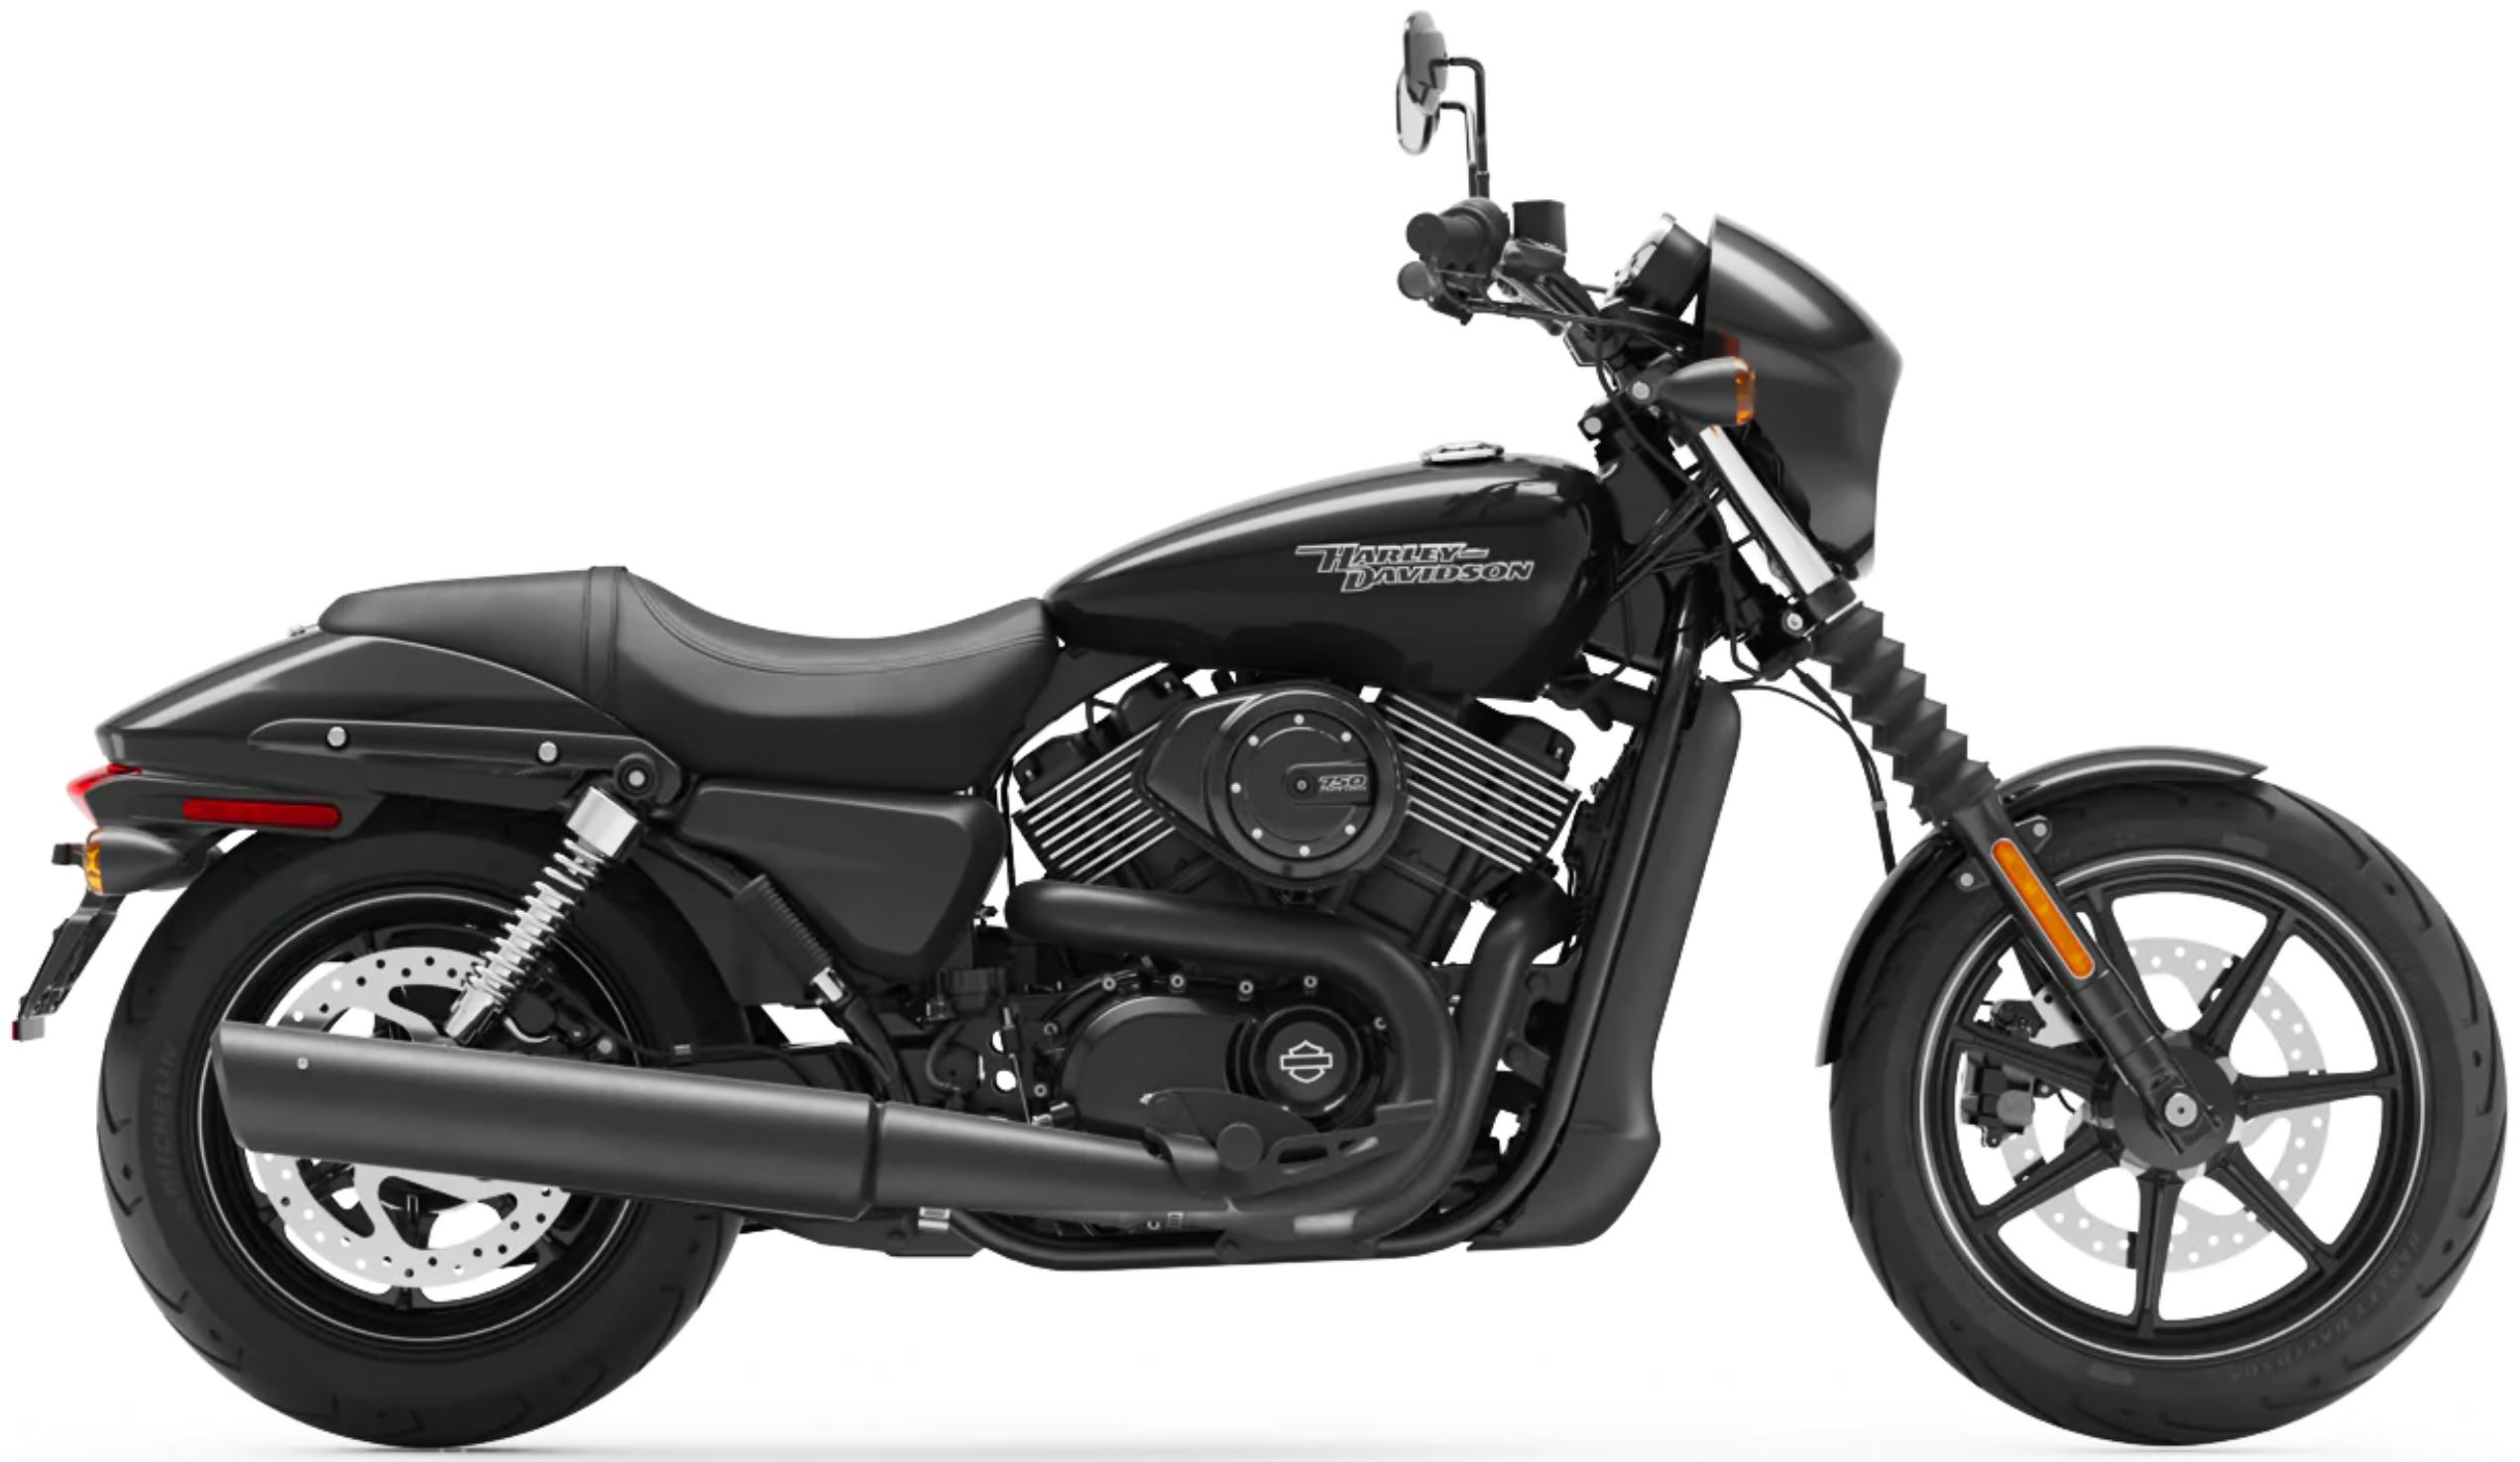 Harley-Davidson Street 750 Discontinued in India